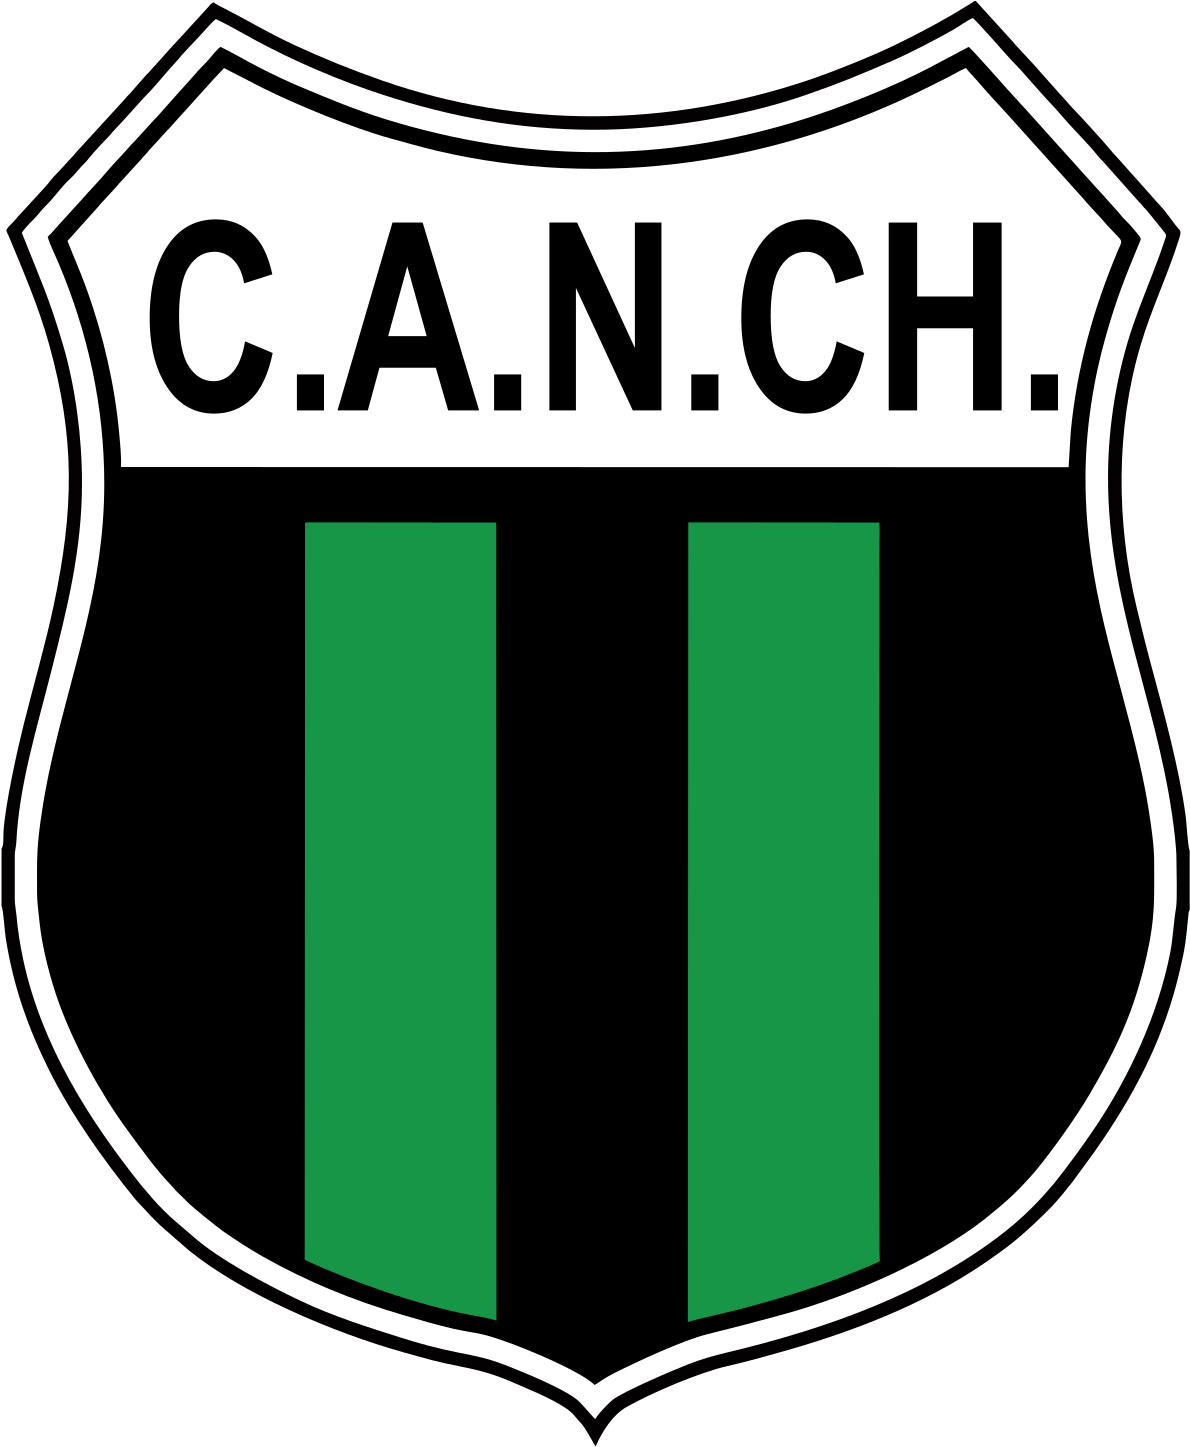 A Black And Green Shield With White Text